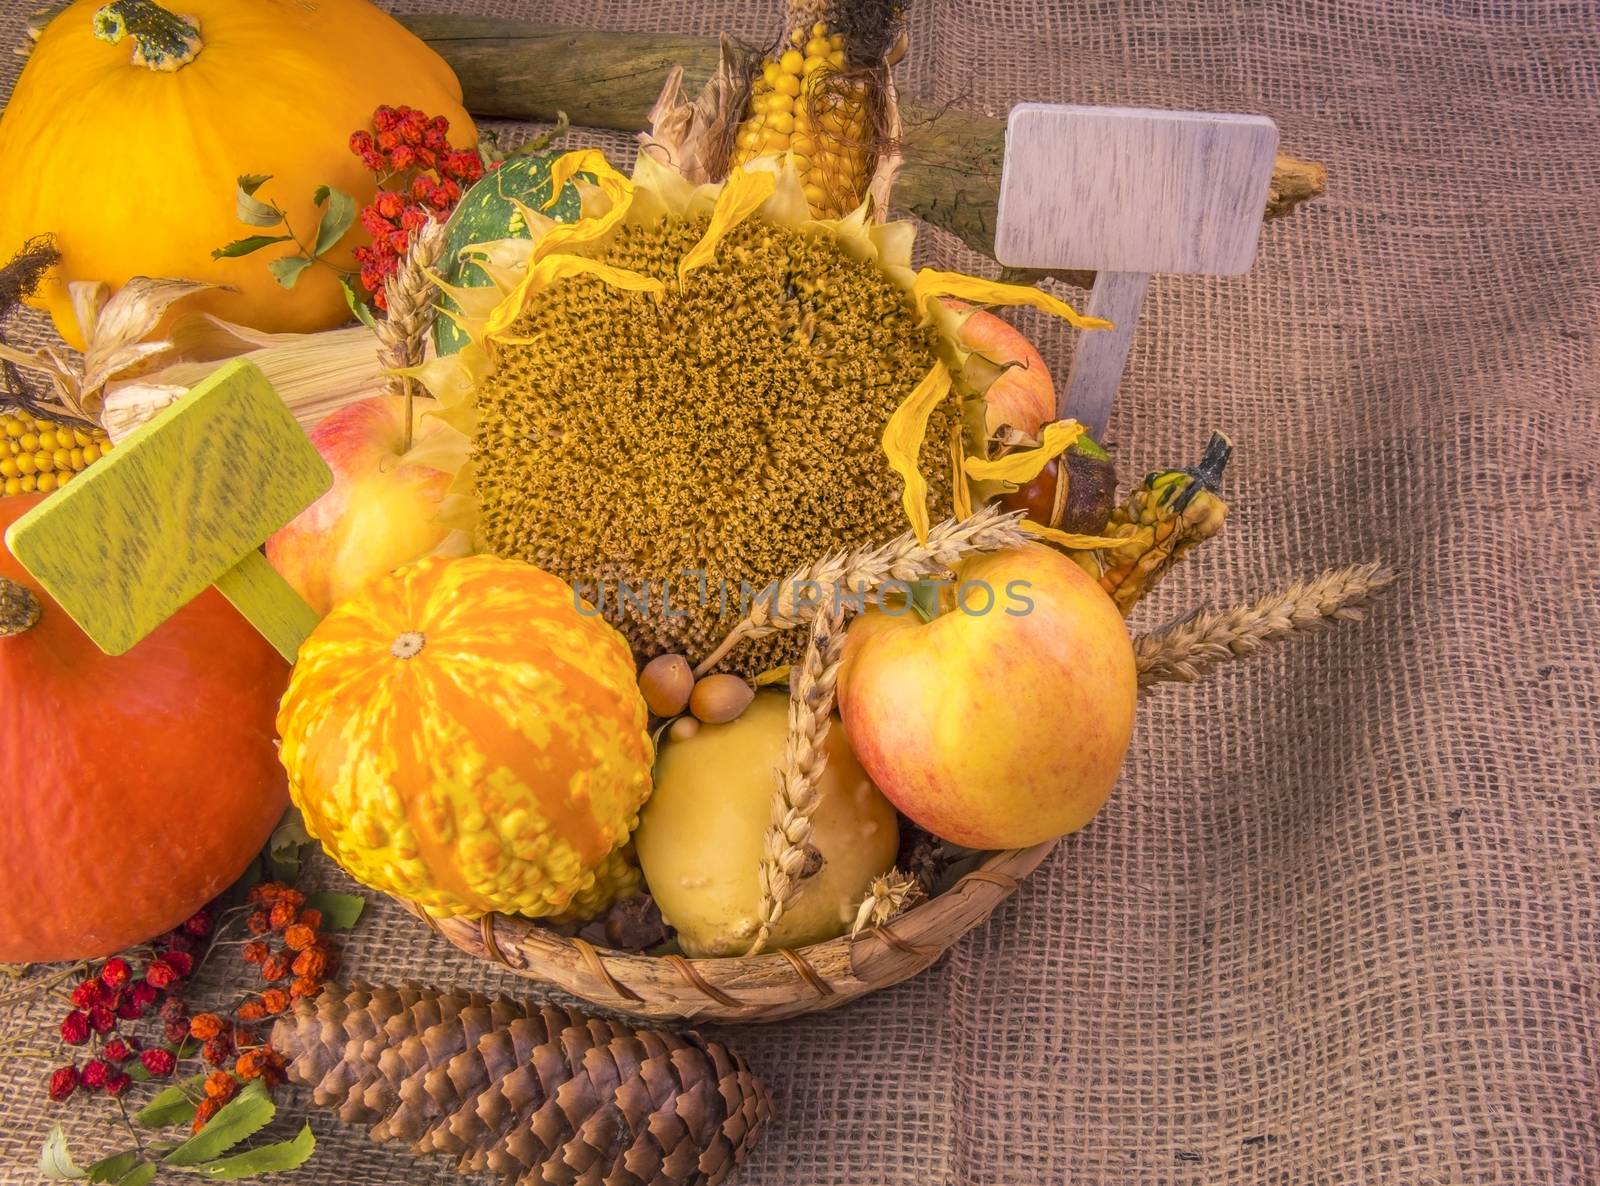 Autumn image with the harvest products from the field and forest arranged in a wicker basket, on a burlap, with two blank placards.